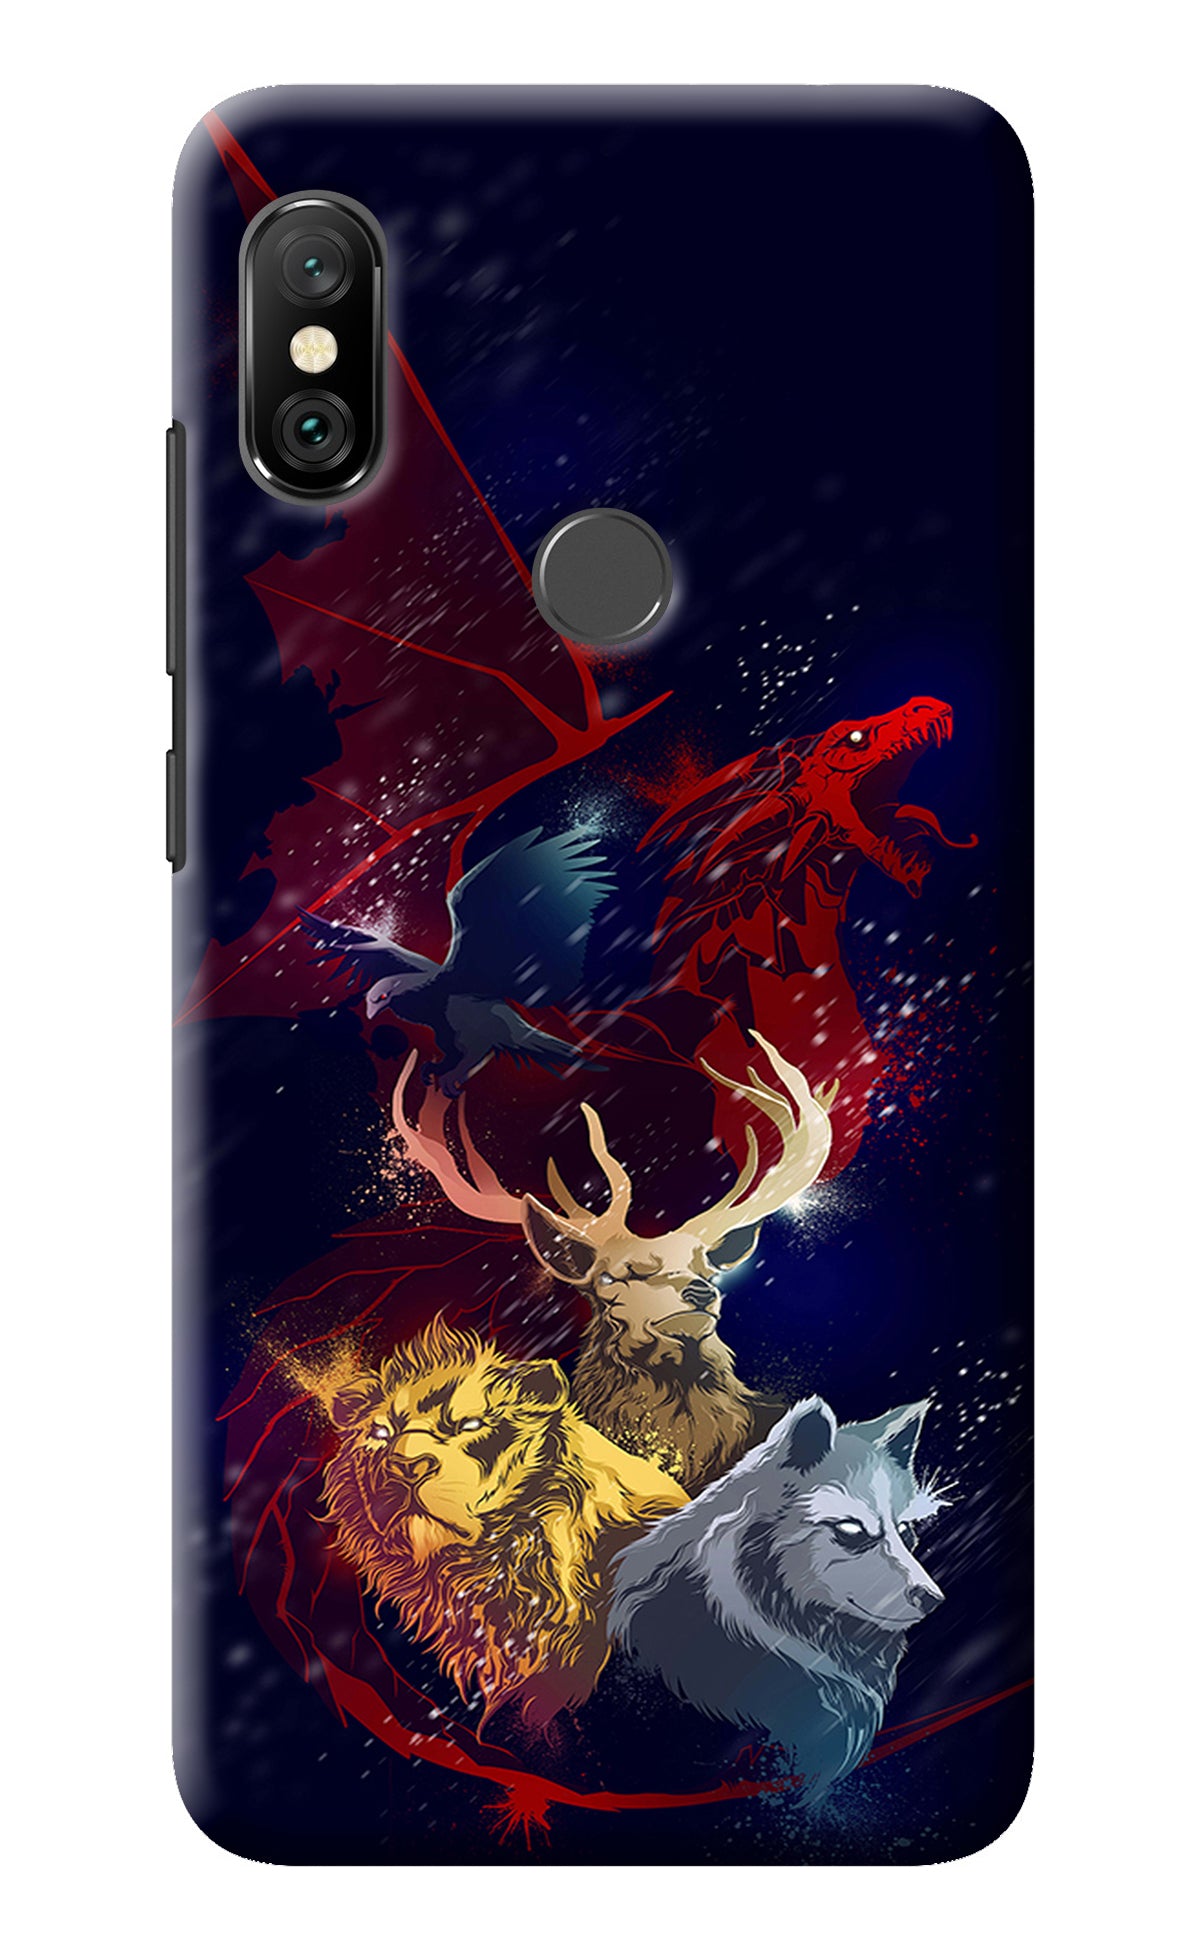 Game Of Thrones Redmi Note 6 Pro Back Cover